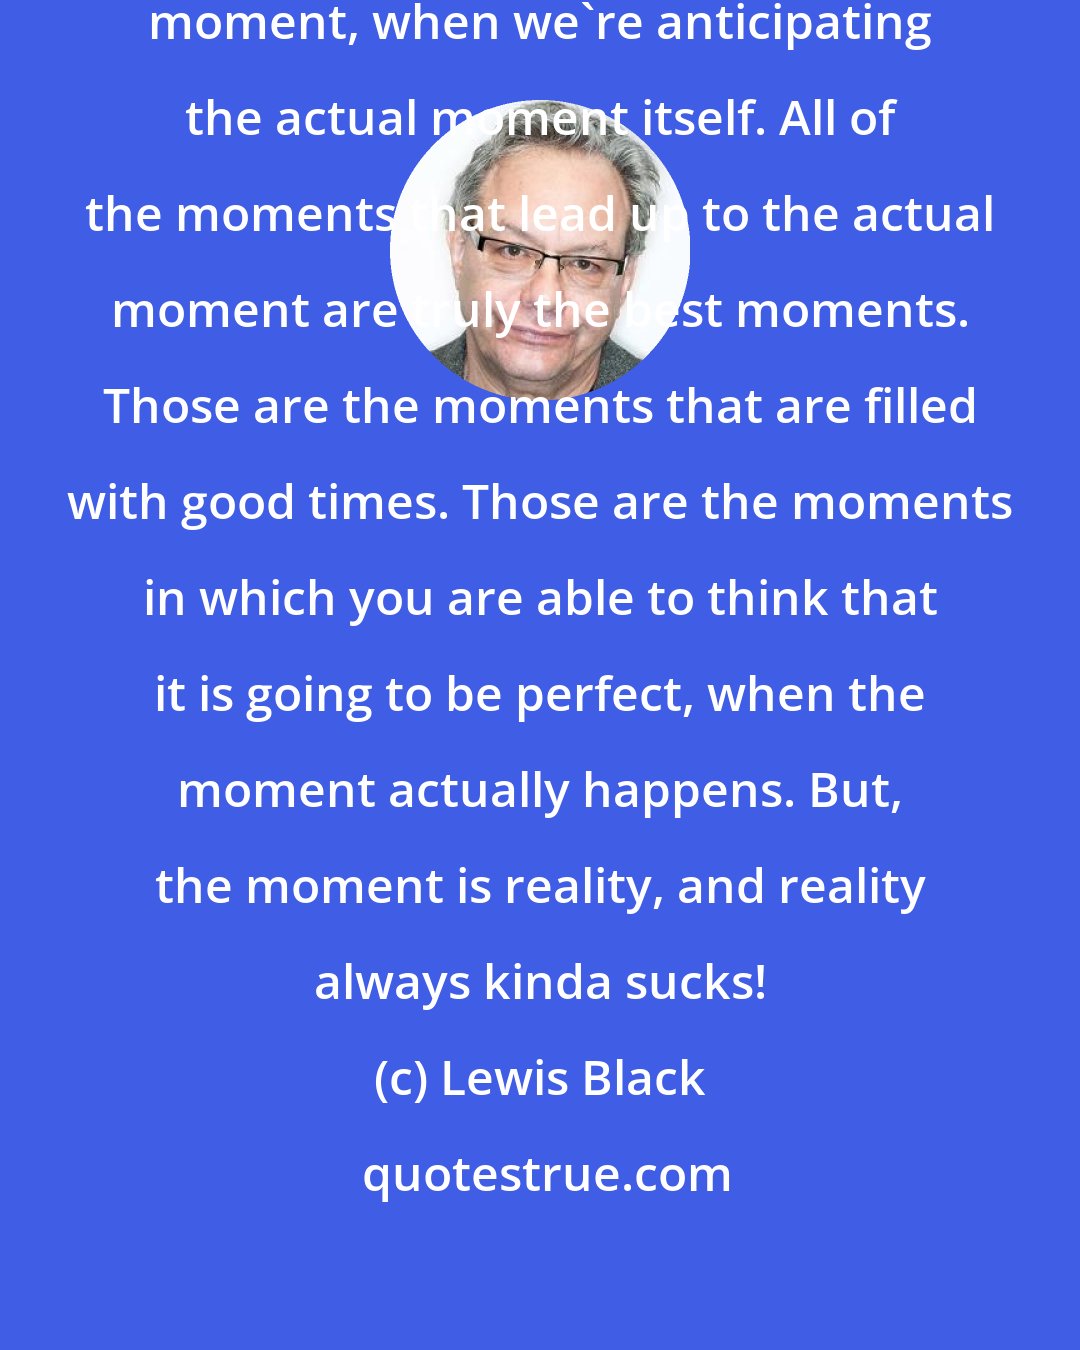 Lewis Black: There is no better moment than this moment, when we're anticipating the actual moment itself. All of the moments that lead up to the actual moment are truly the best moments. Those are the moments that are filled with good times. Those are the moments in which you are able to think that it is going to be perfect, when the moment actually happens. But, the moment is reality, and reality always kinda sucks!